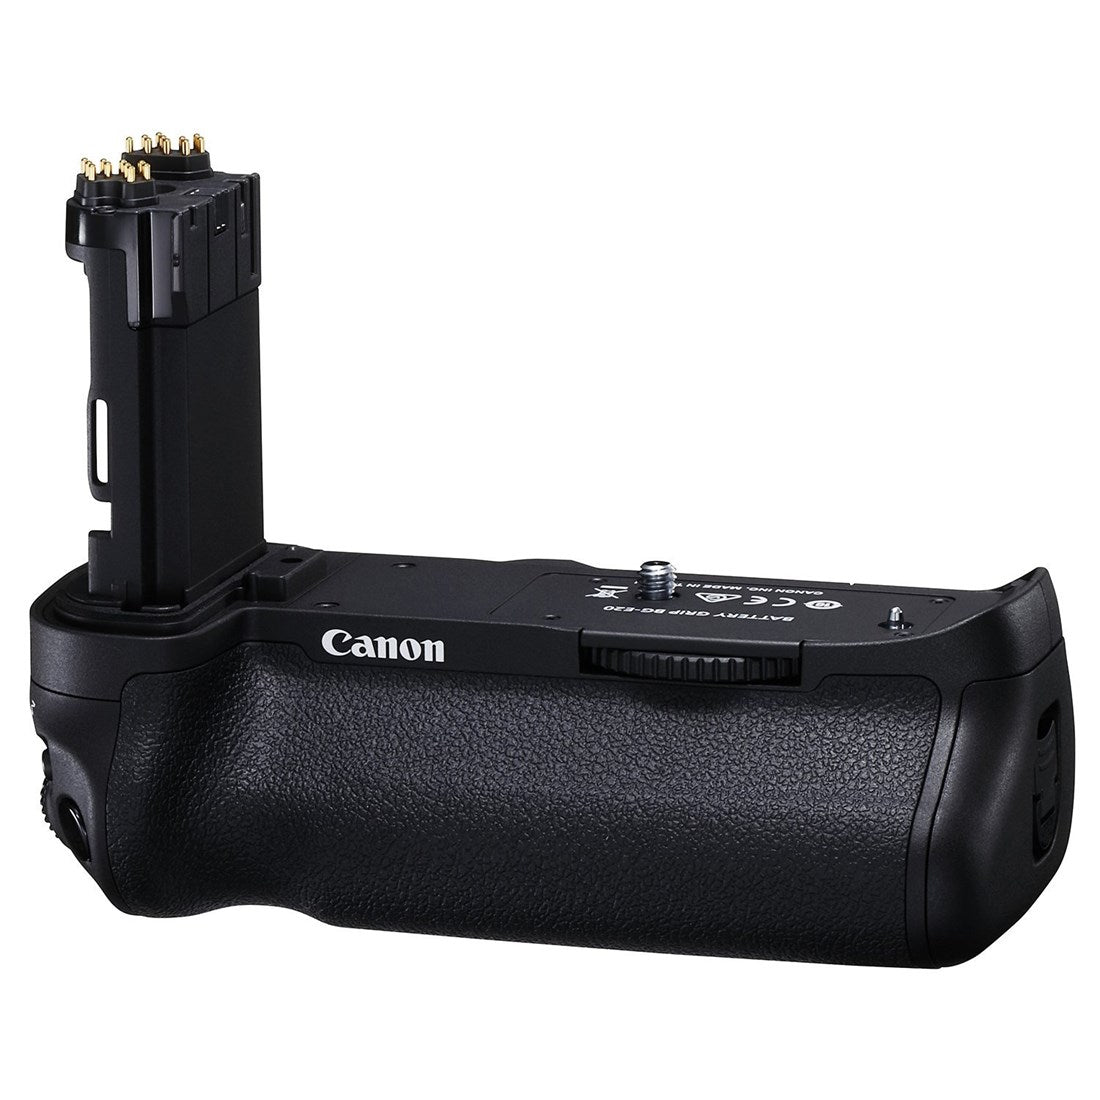 Canon BG-E20 - Battery Grip for Canon EOS 5D Mark IV  Black - Product Photo 1 - Side View